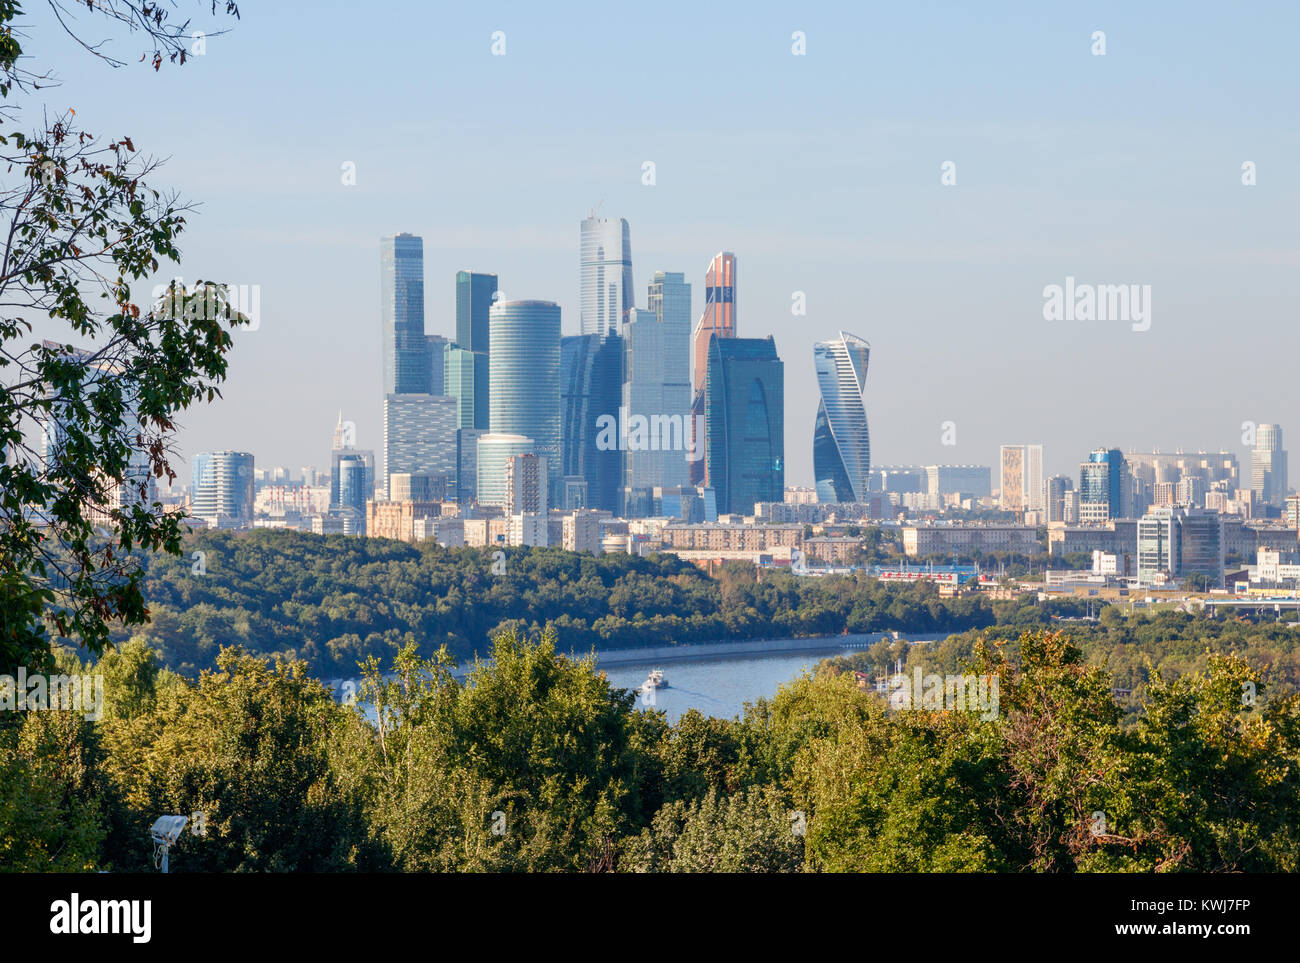 Moscow skyline with the skyscrapers of Moscow International Business Center (MIBC), Russia. Stock Photo